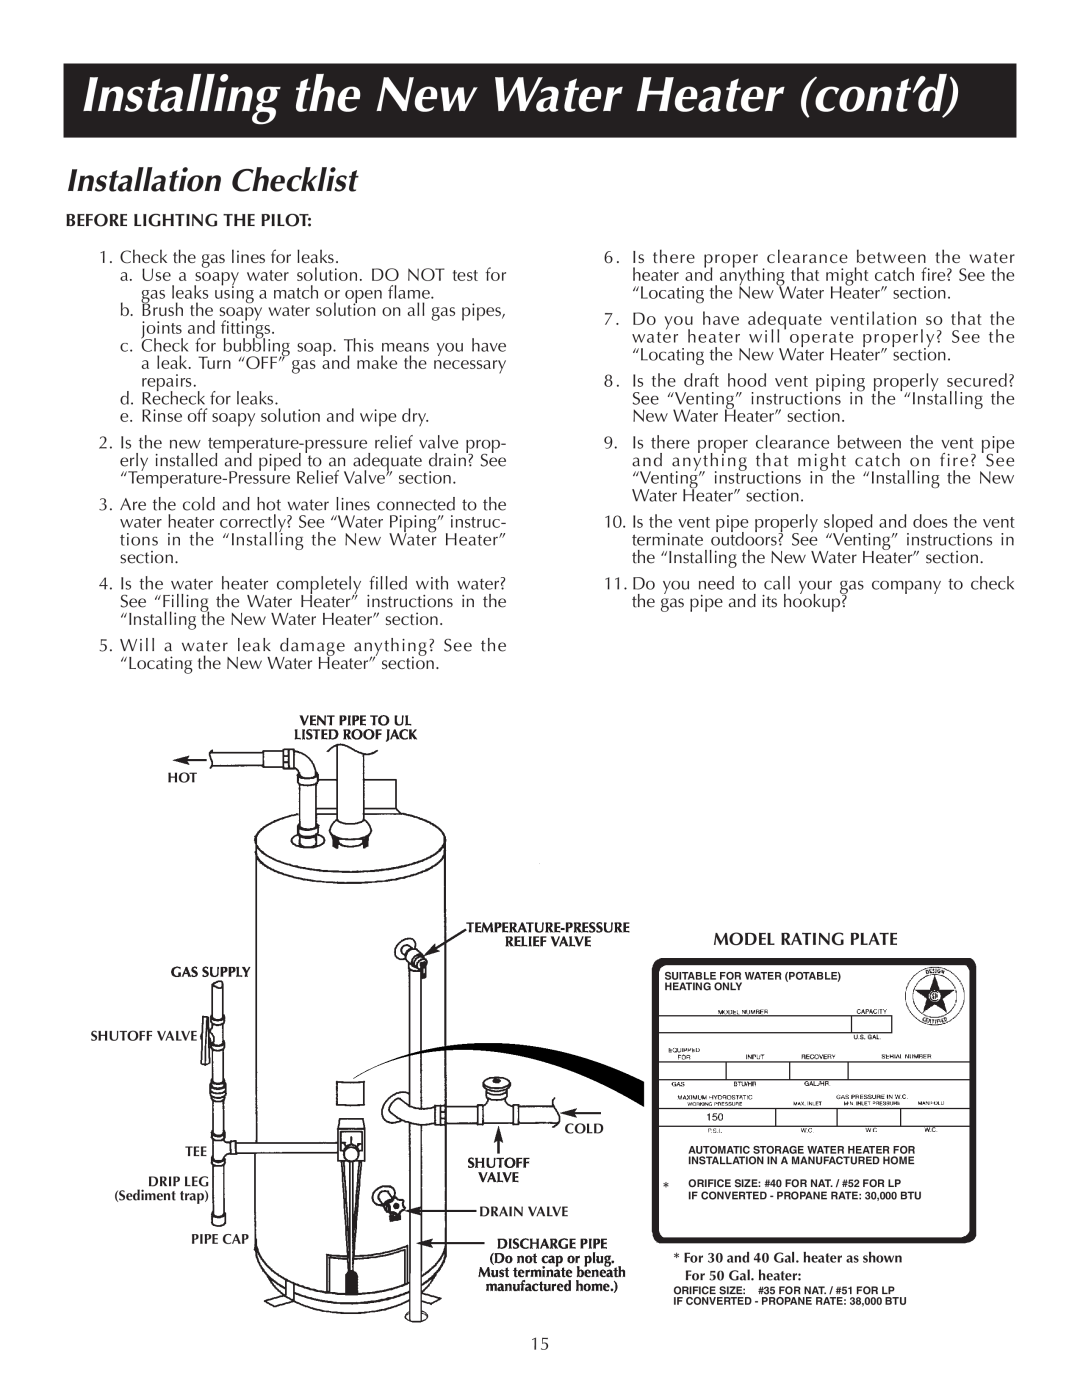 Reliance Water Heaters 184123-000 Installation Checklist, Installing the New Water Heater cont’d, Model Rating Plate 